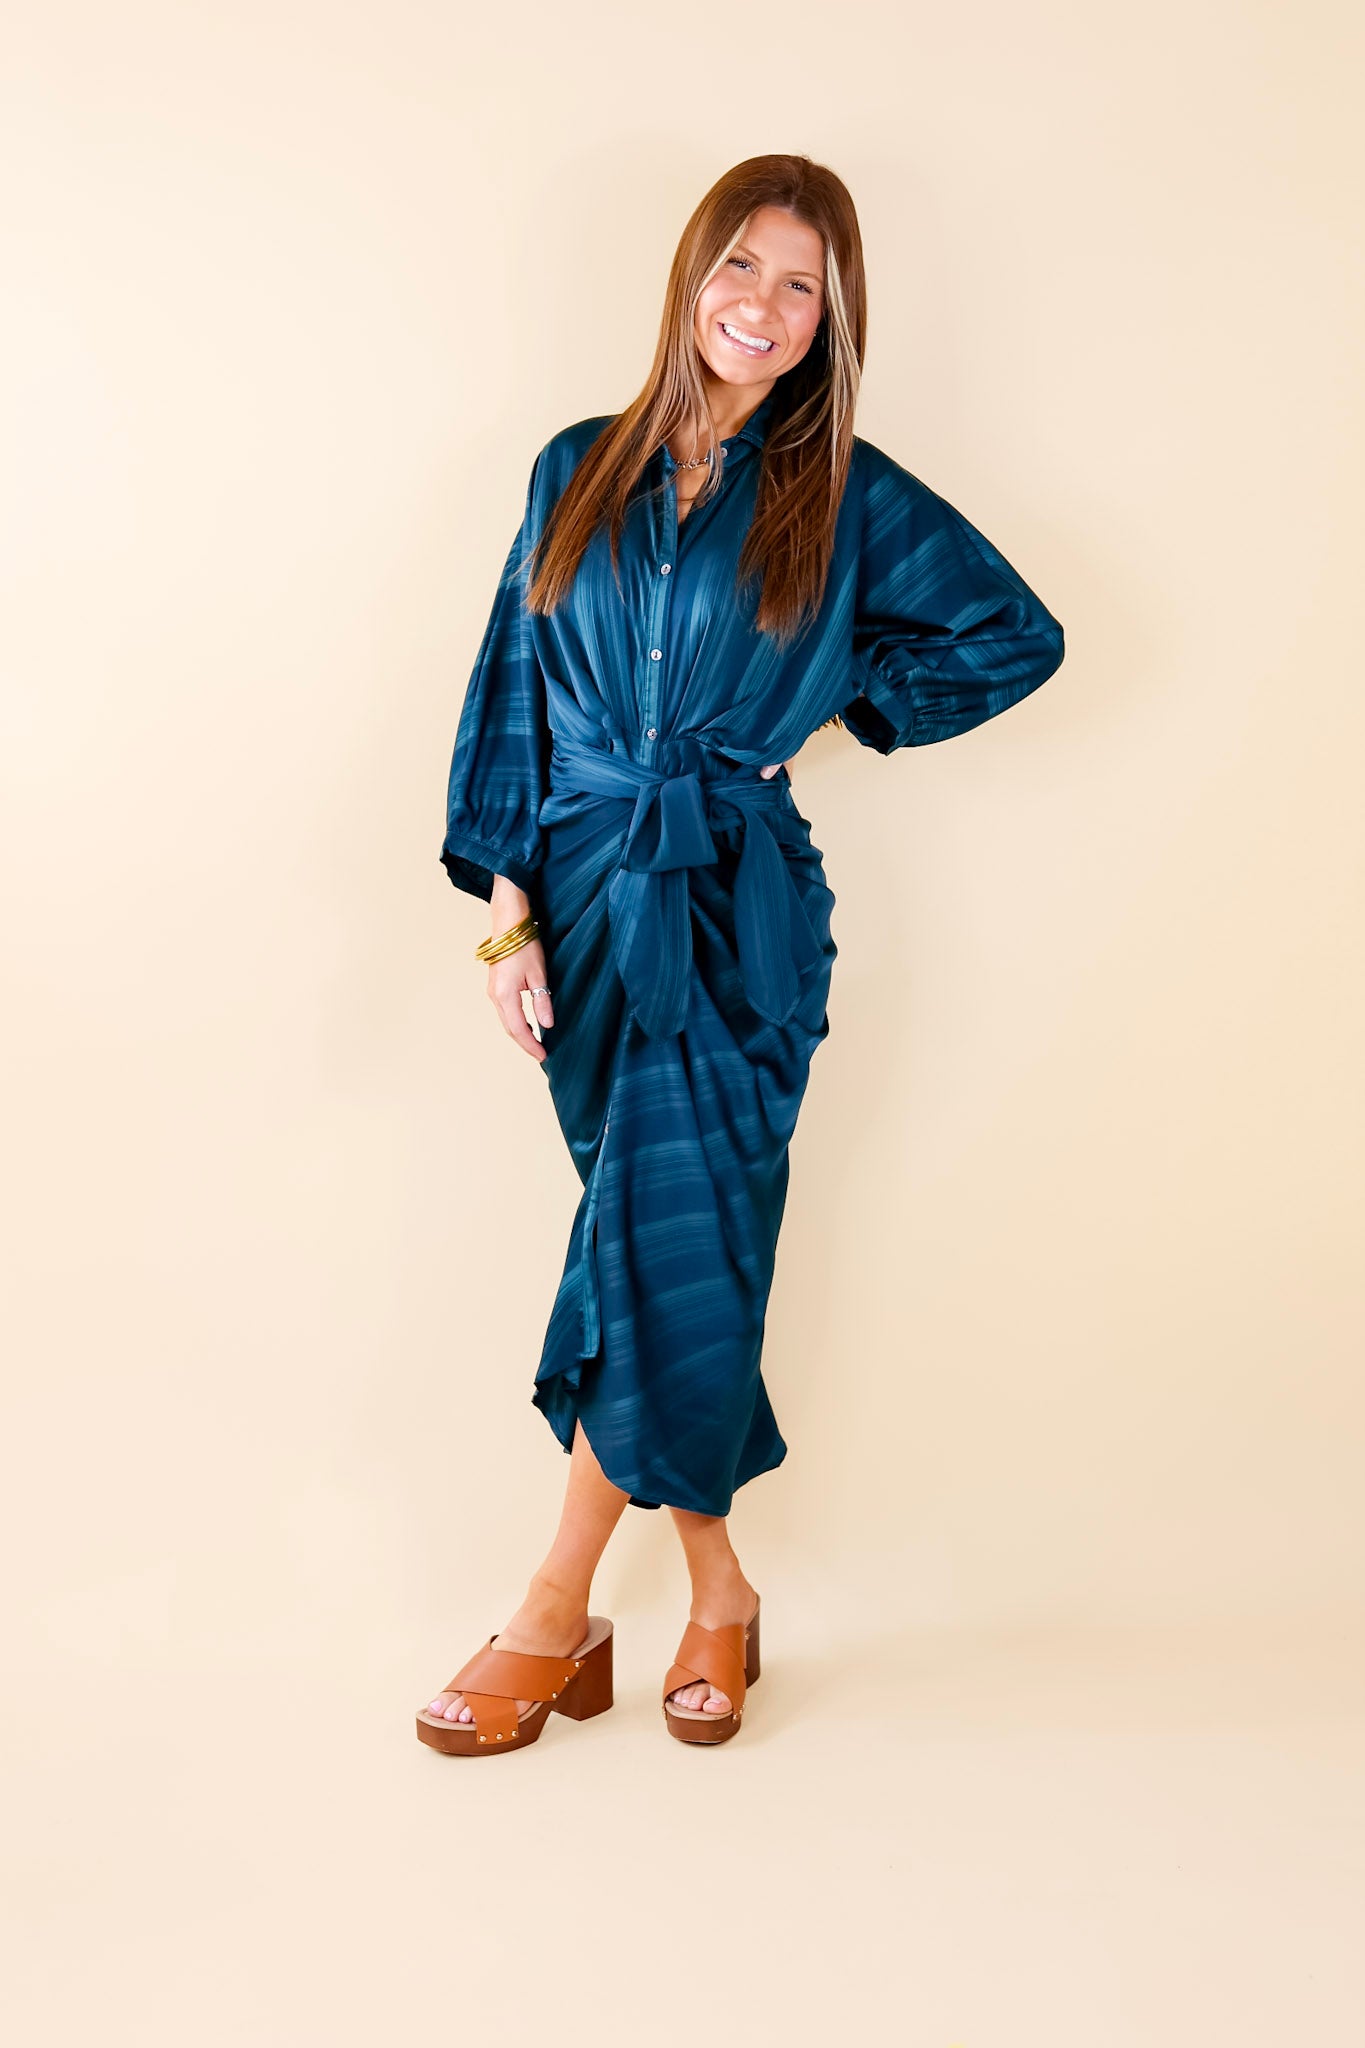 Decisions To Make Button Up Midi Dress in Dark Teal Blue - Giddy Up Glamour Boutique